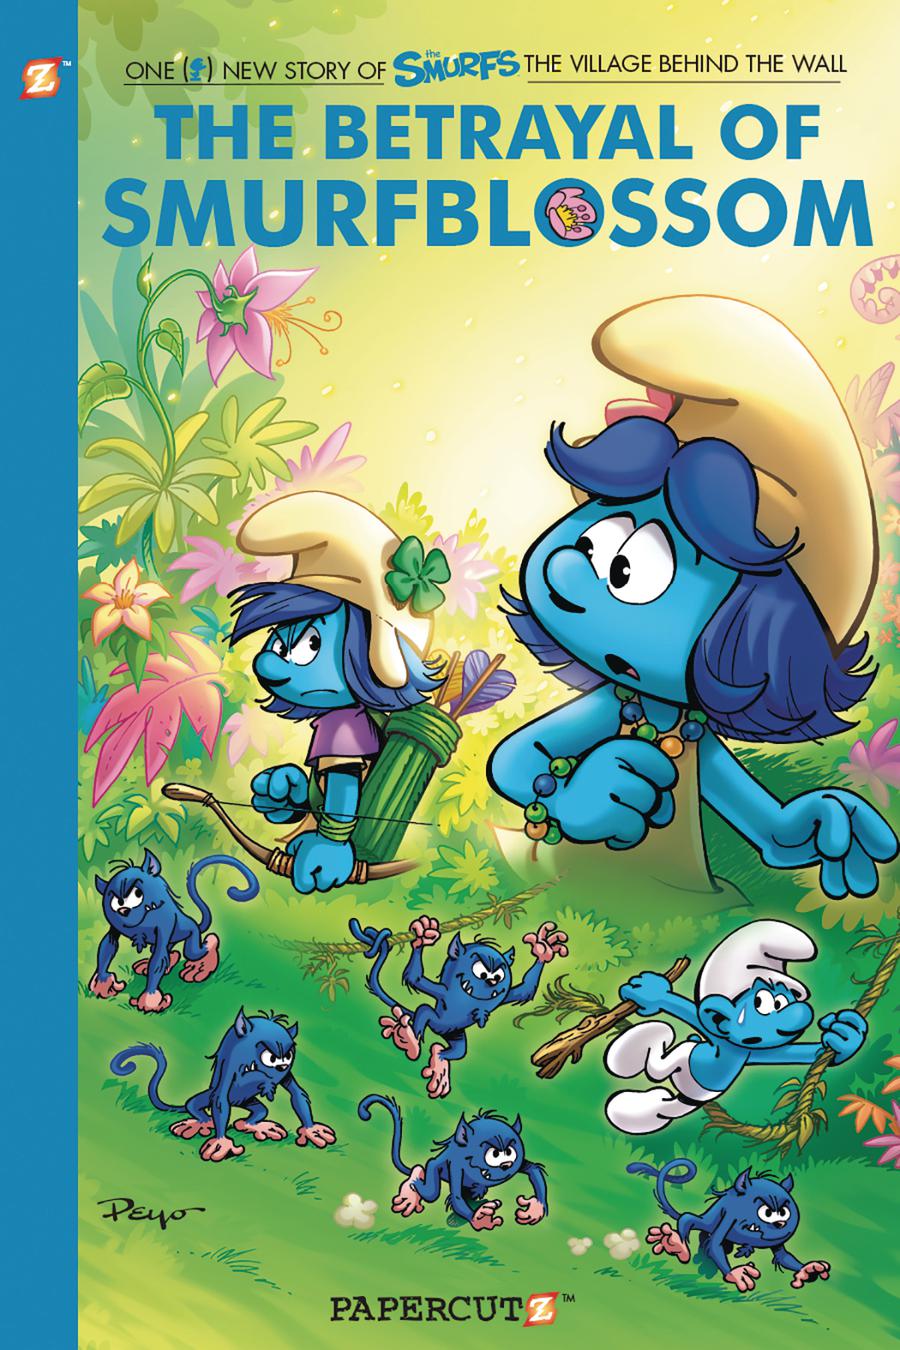 Smurfs The Village Behind The Wall Vol 2 Betrayal Of Smurf Blossom HC